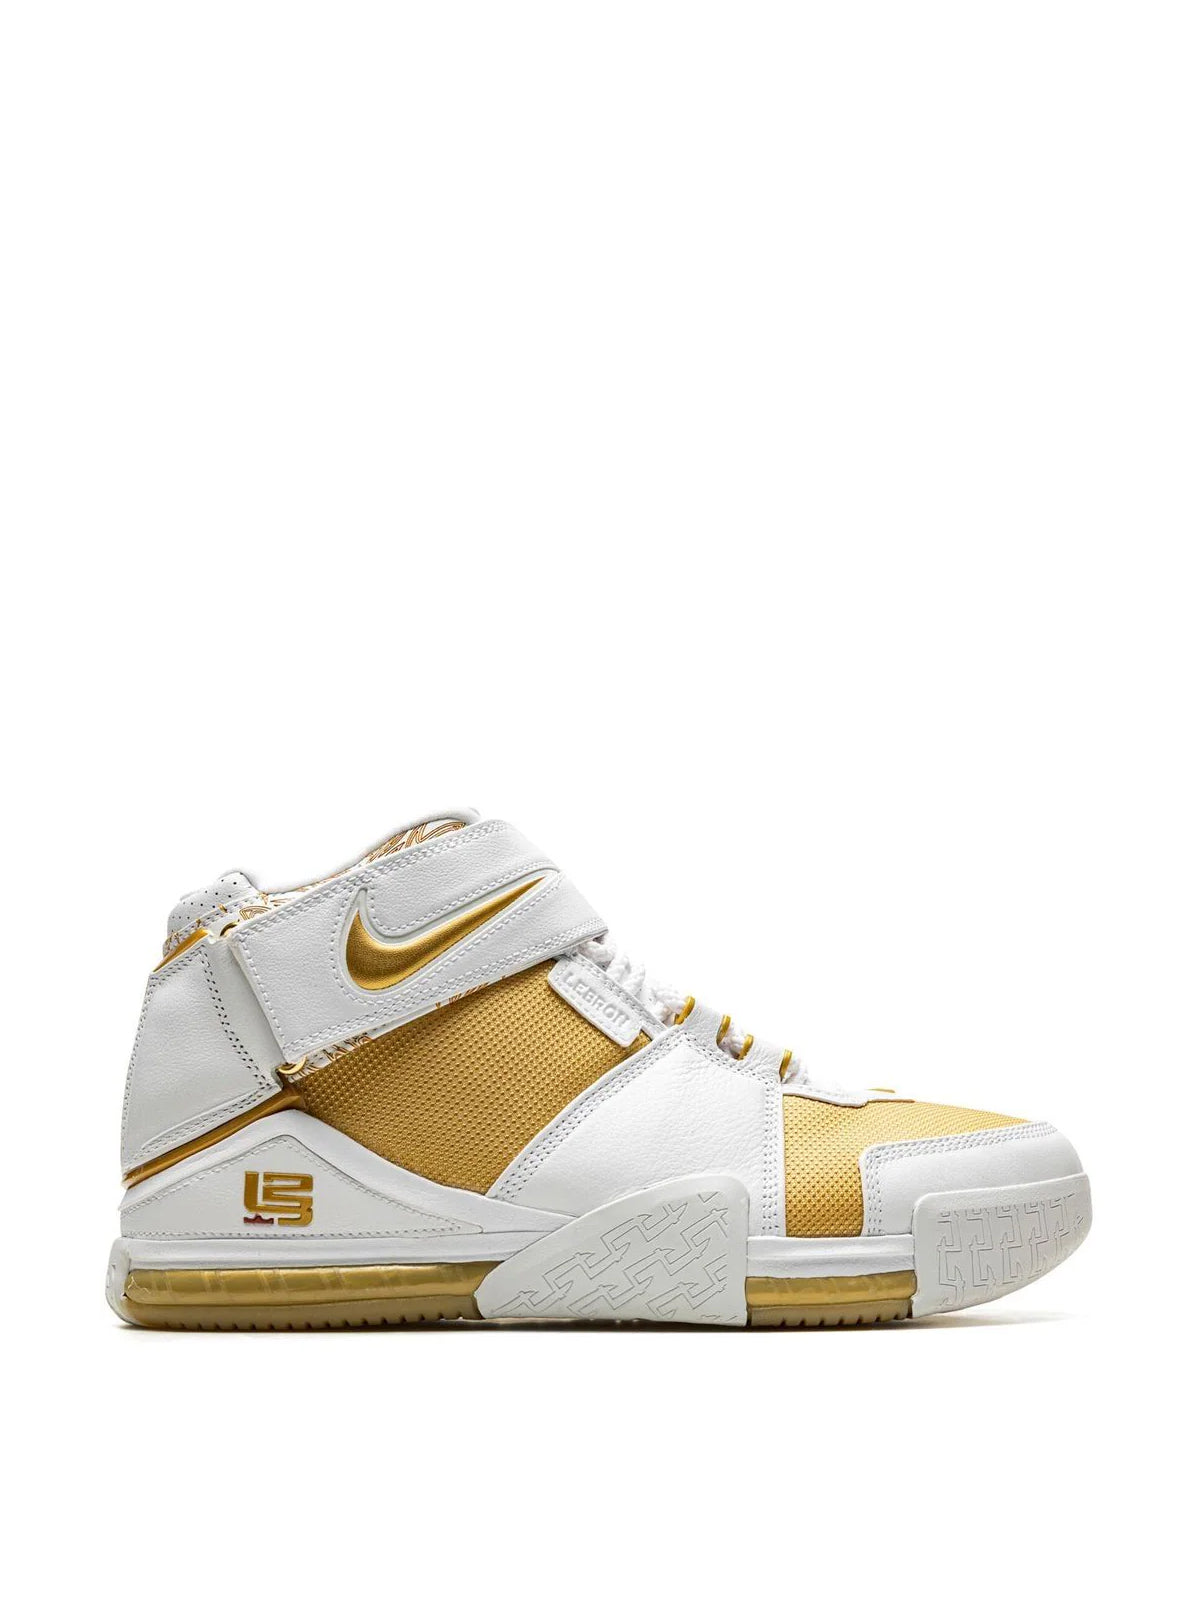 Nike-OUTLET-SALE-Zoom LeBron II Sneakers-ARCHIVIST